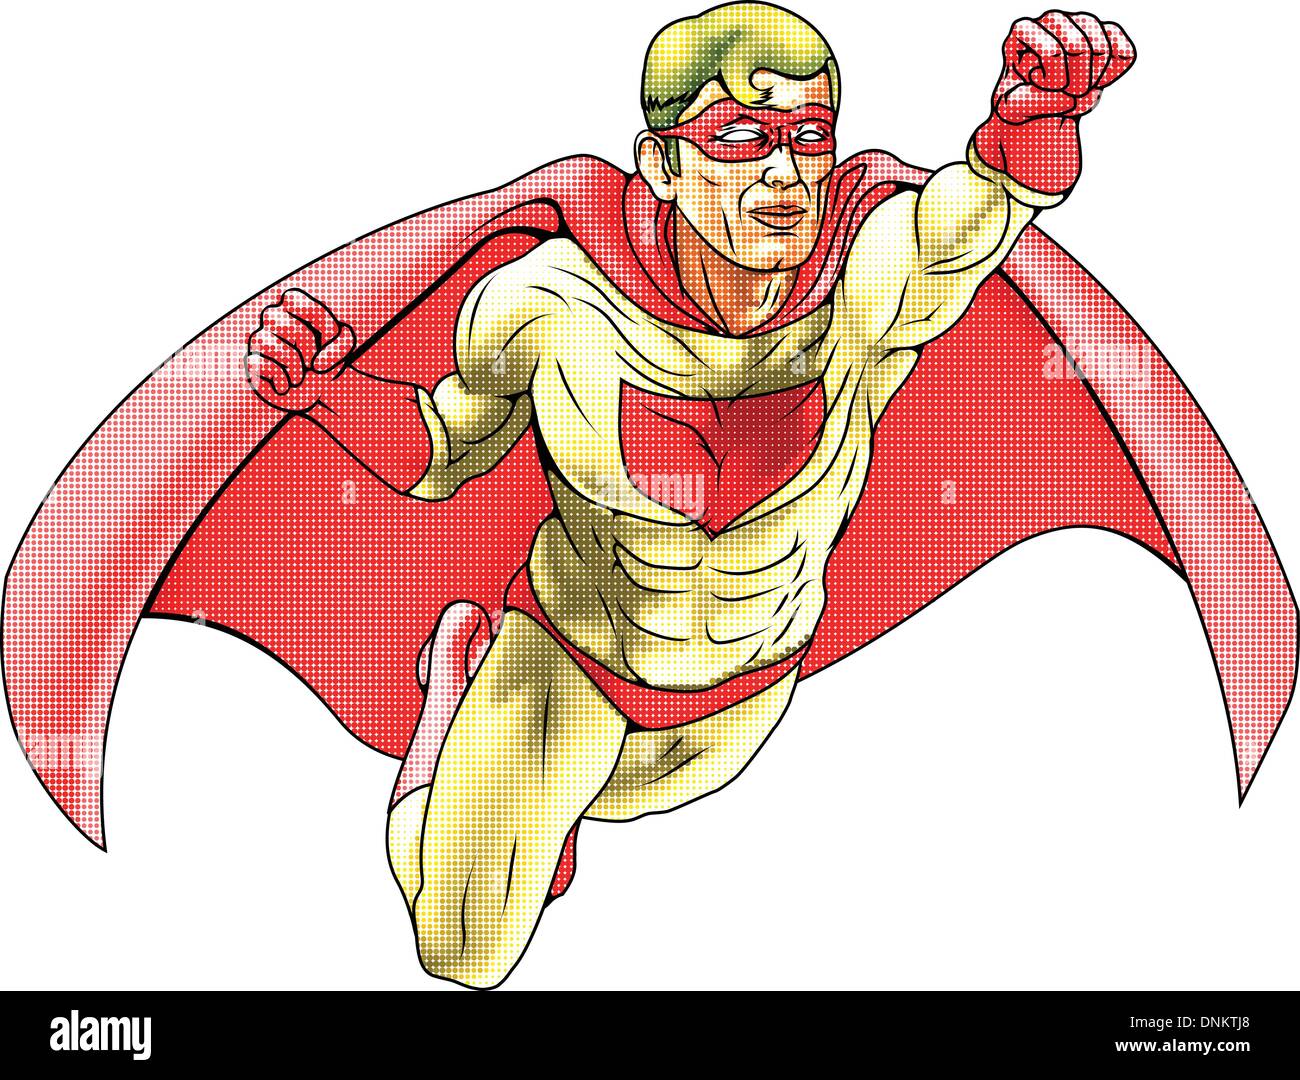 Illustration of  super hero dressed in red and yellow costume and cape flying. Has color haftone style for traditional comic boo Stock Vector